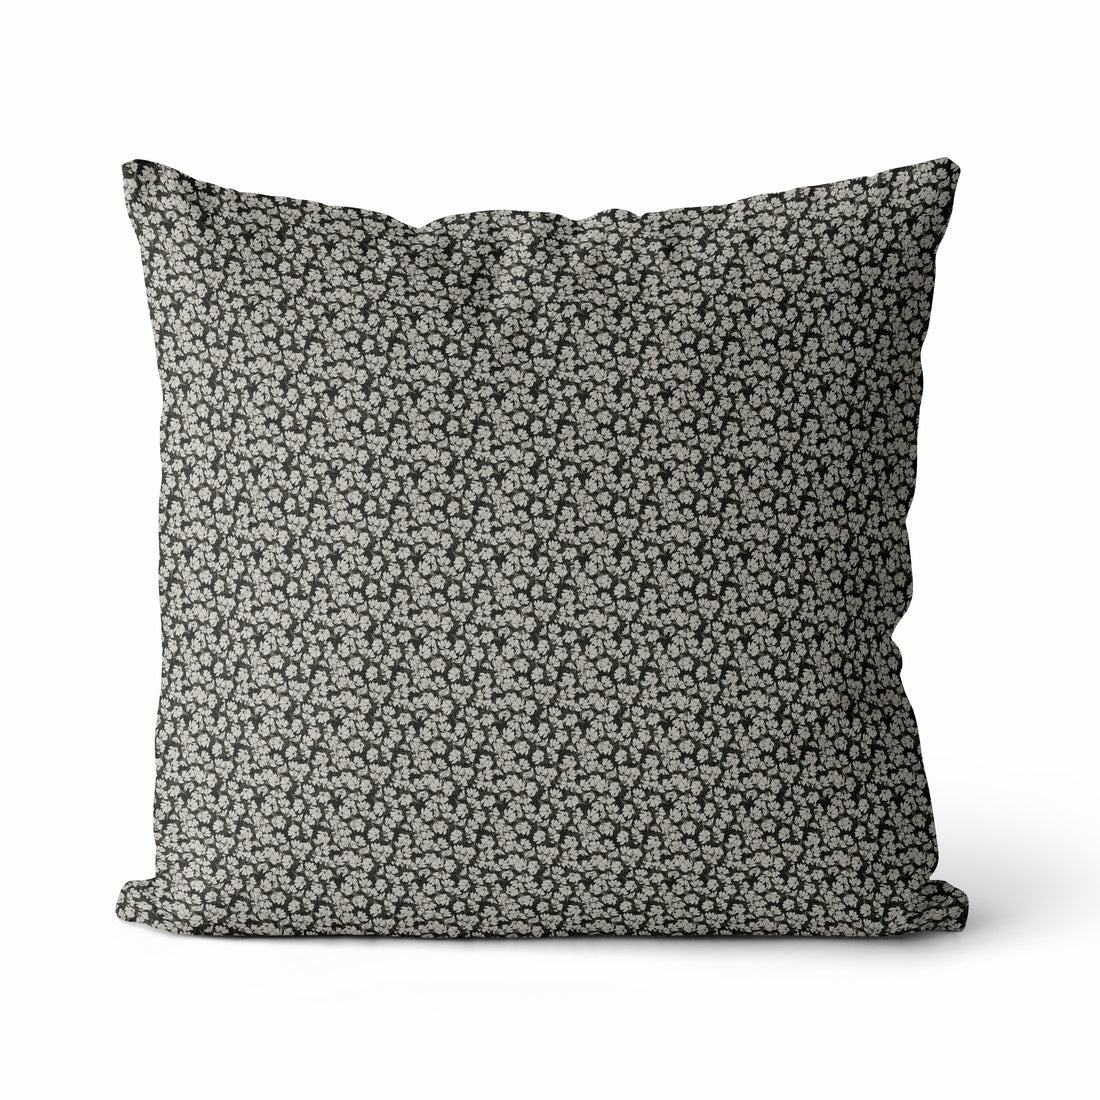 Gracie | Floral Pillow Cover